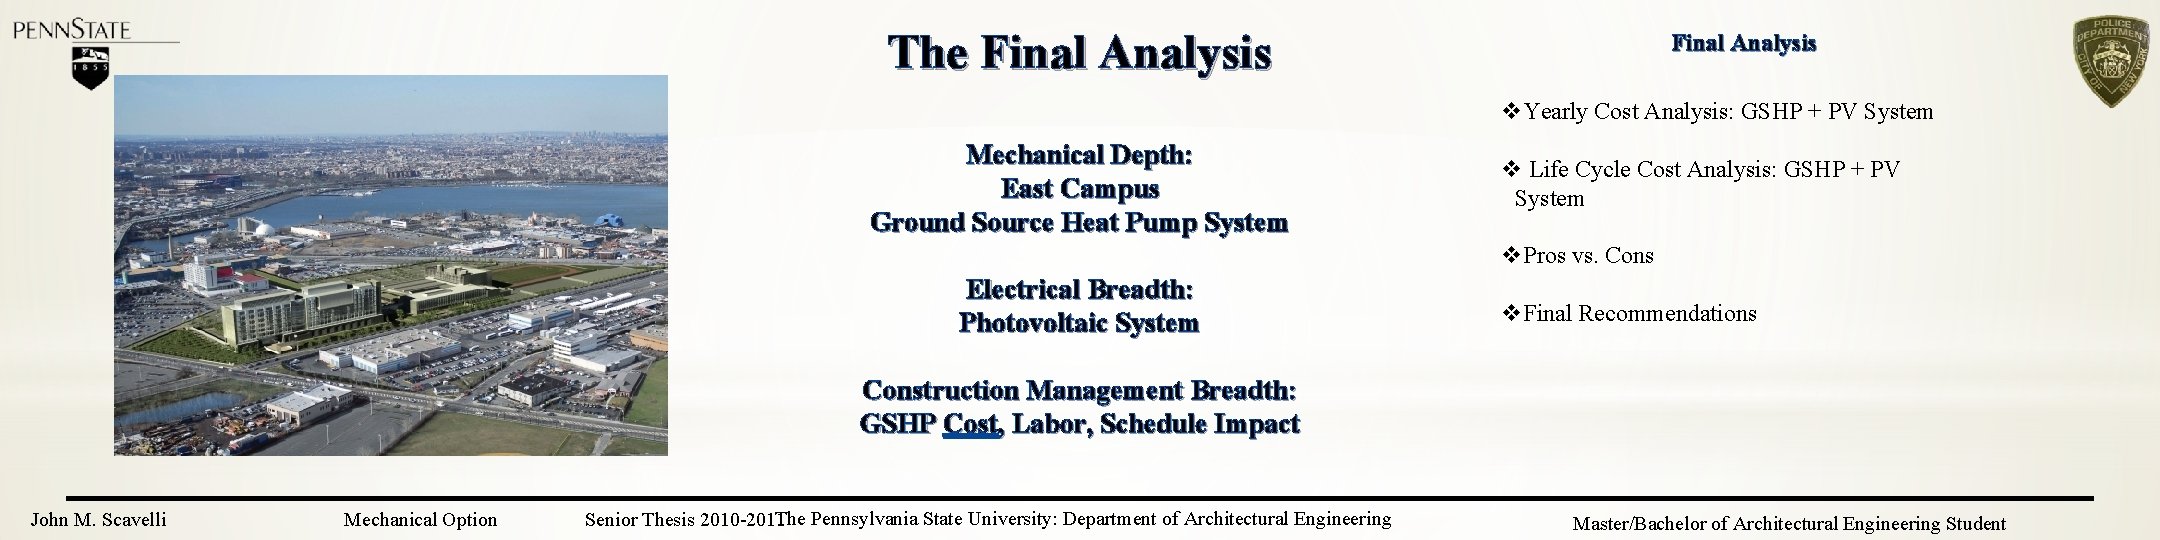 The Final Analysis v. Yearly Cost Analysis: GSHP + PV System Mechanical Depth: East